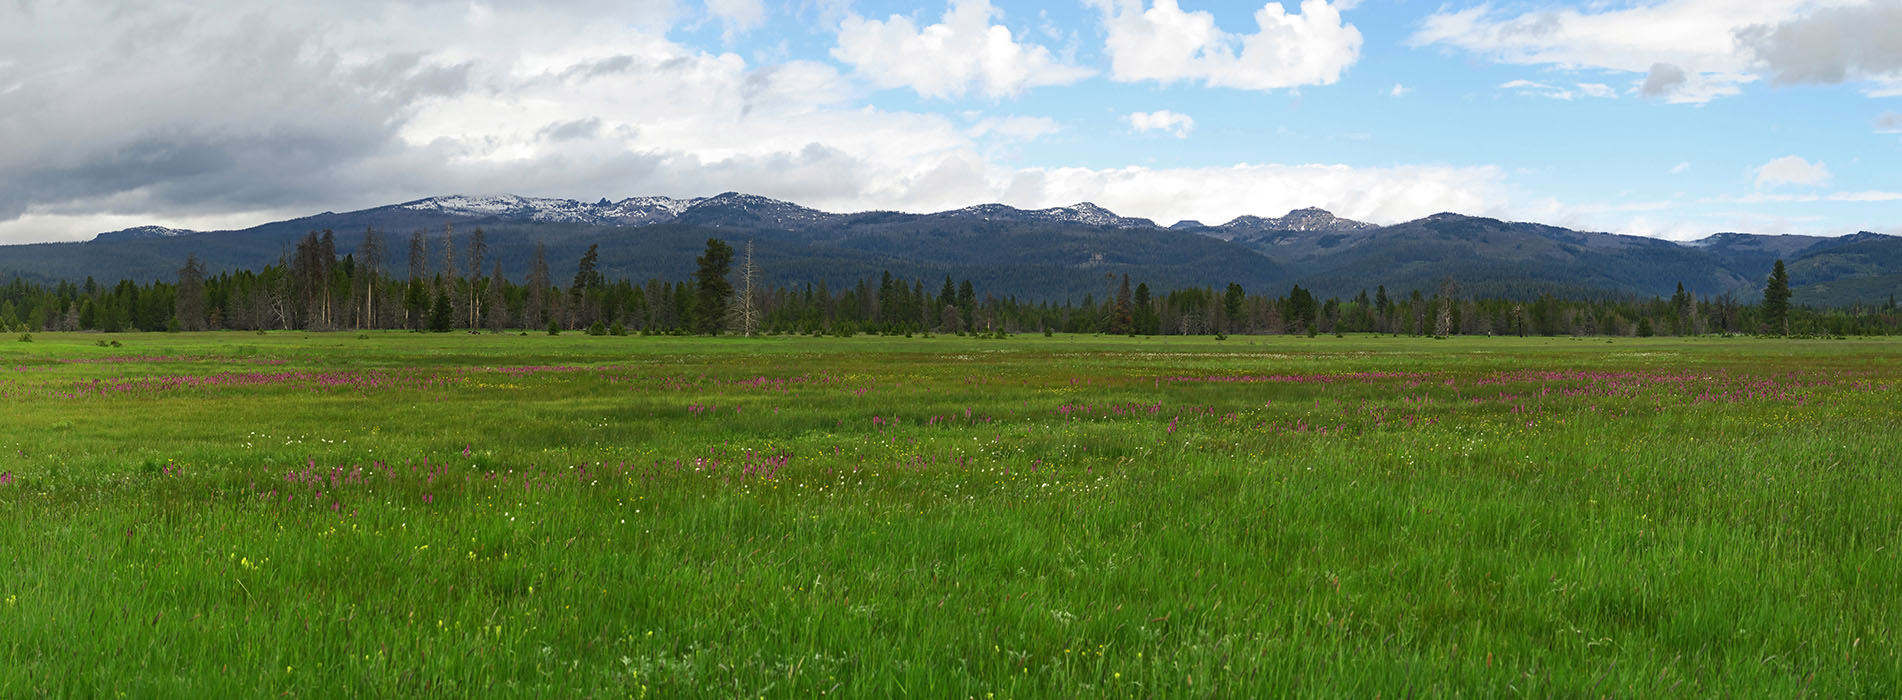 Logan Valley panorama [Logan Valley, Malheur National Forest, Grant County, Oregon]